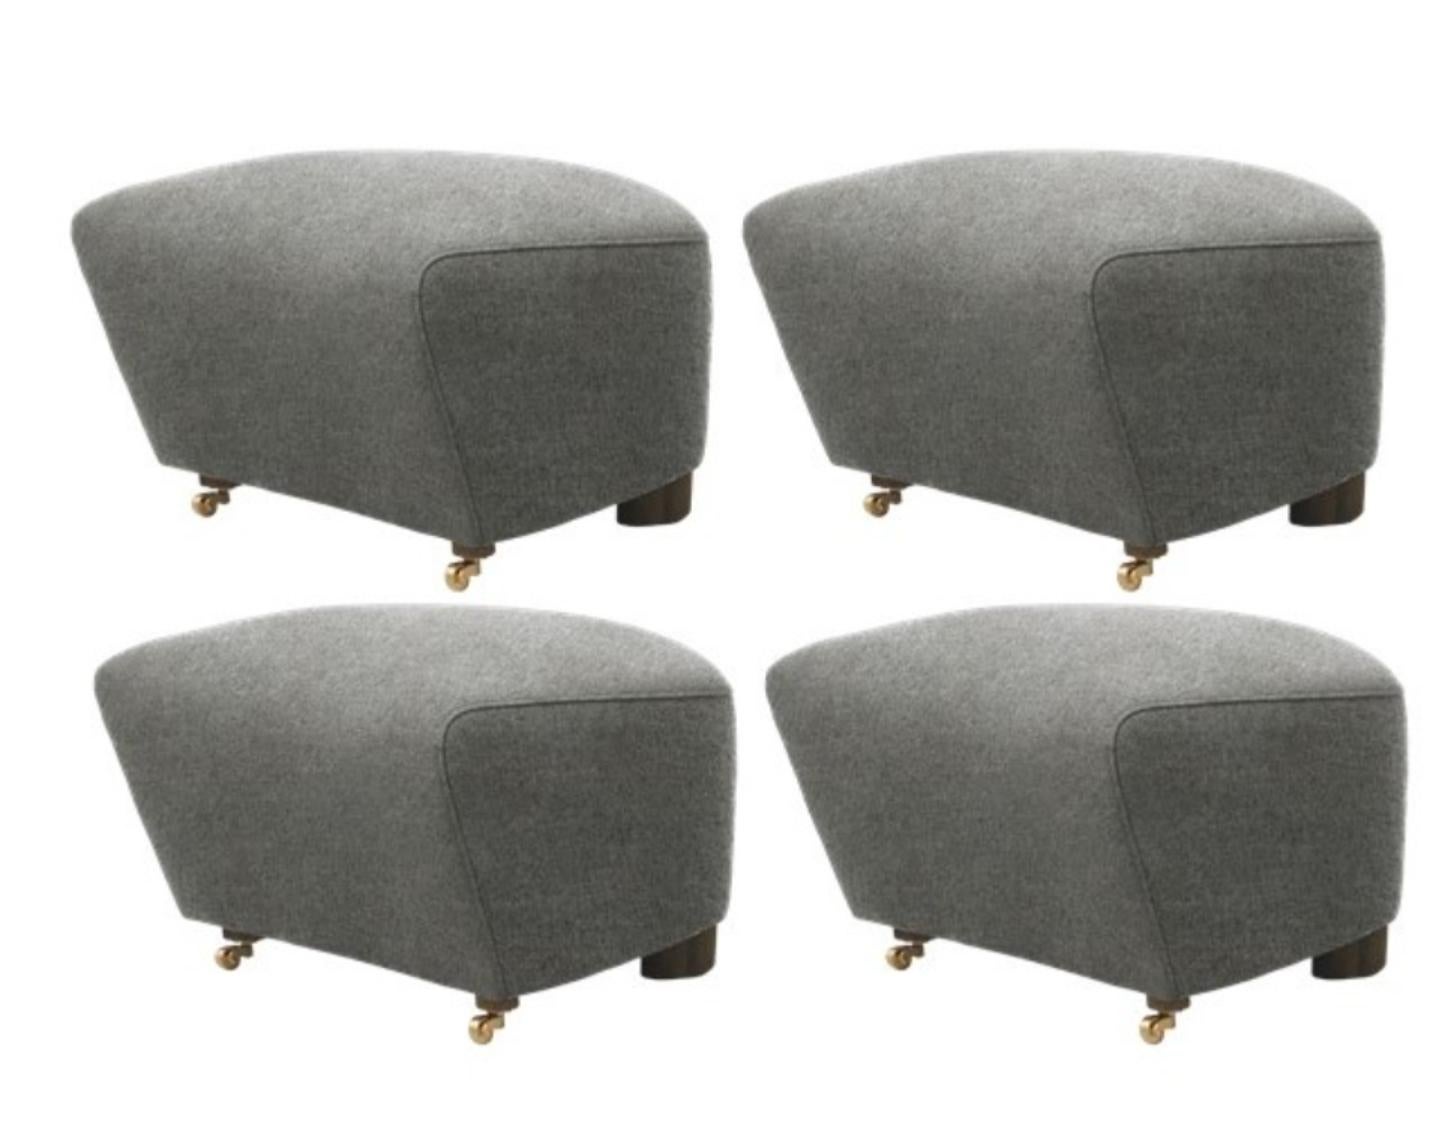 Set of 4 grey smoked oak hallingdal the tired man footstools by Lassen
Dimensions: W 55 x D 53 x H 36 cm
Materials: Textile

Flemming Lassen designed the overstuffed easy chair, The Tired Man, for The Copenhagen Cabinetmakers’ Guild Competition